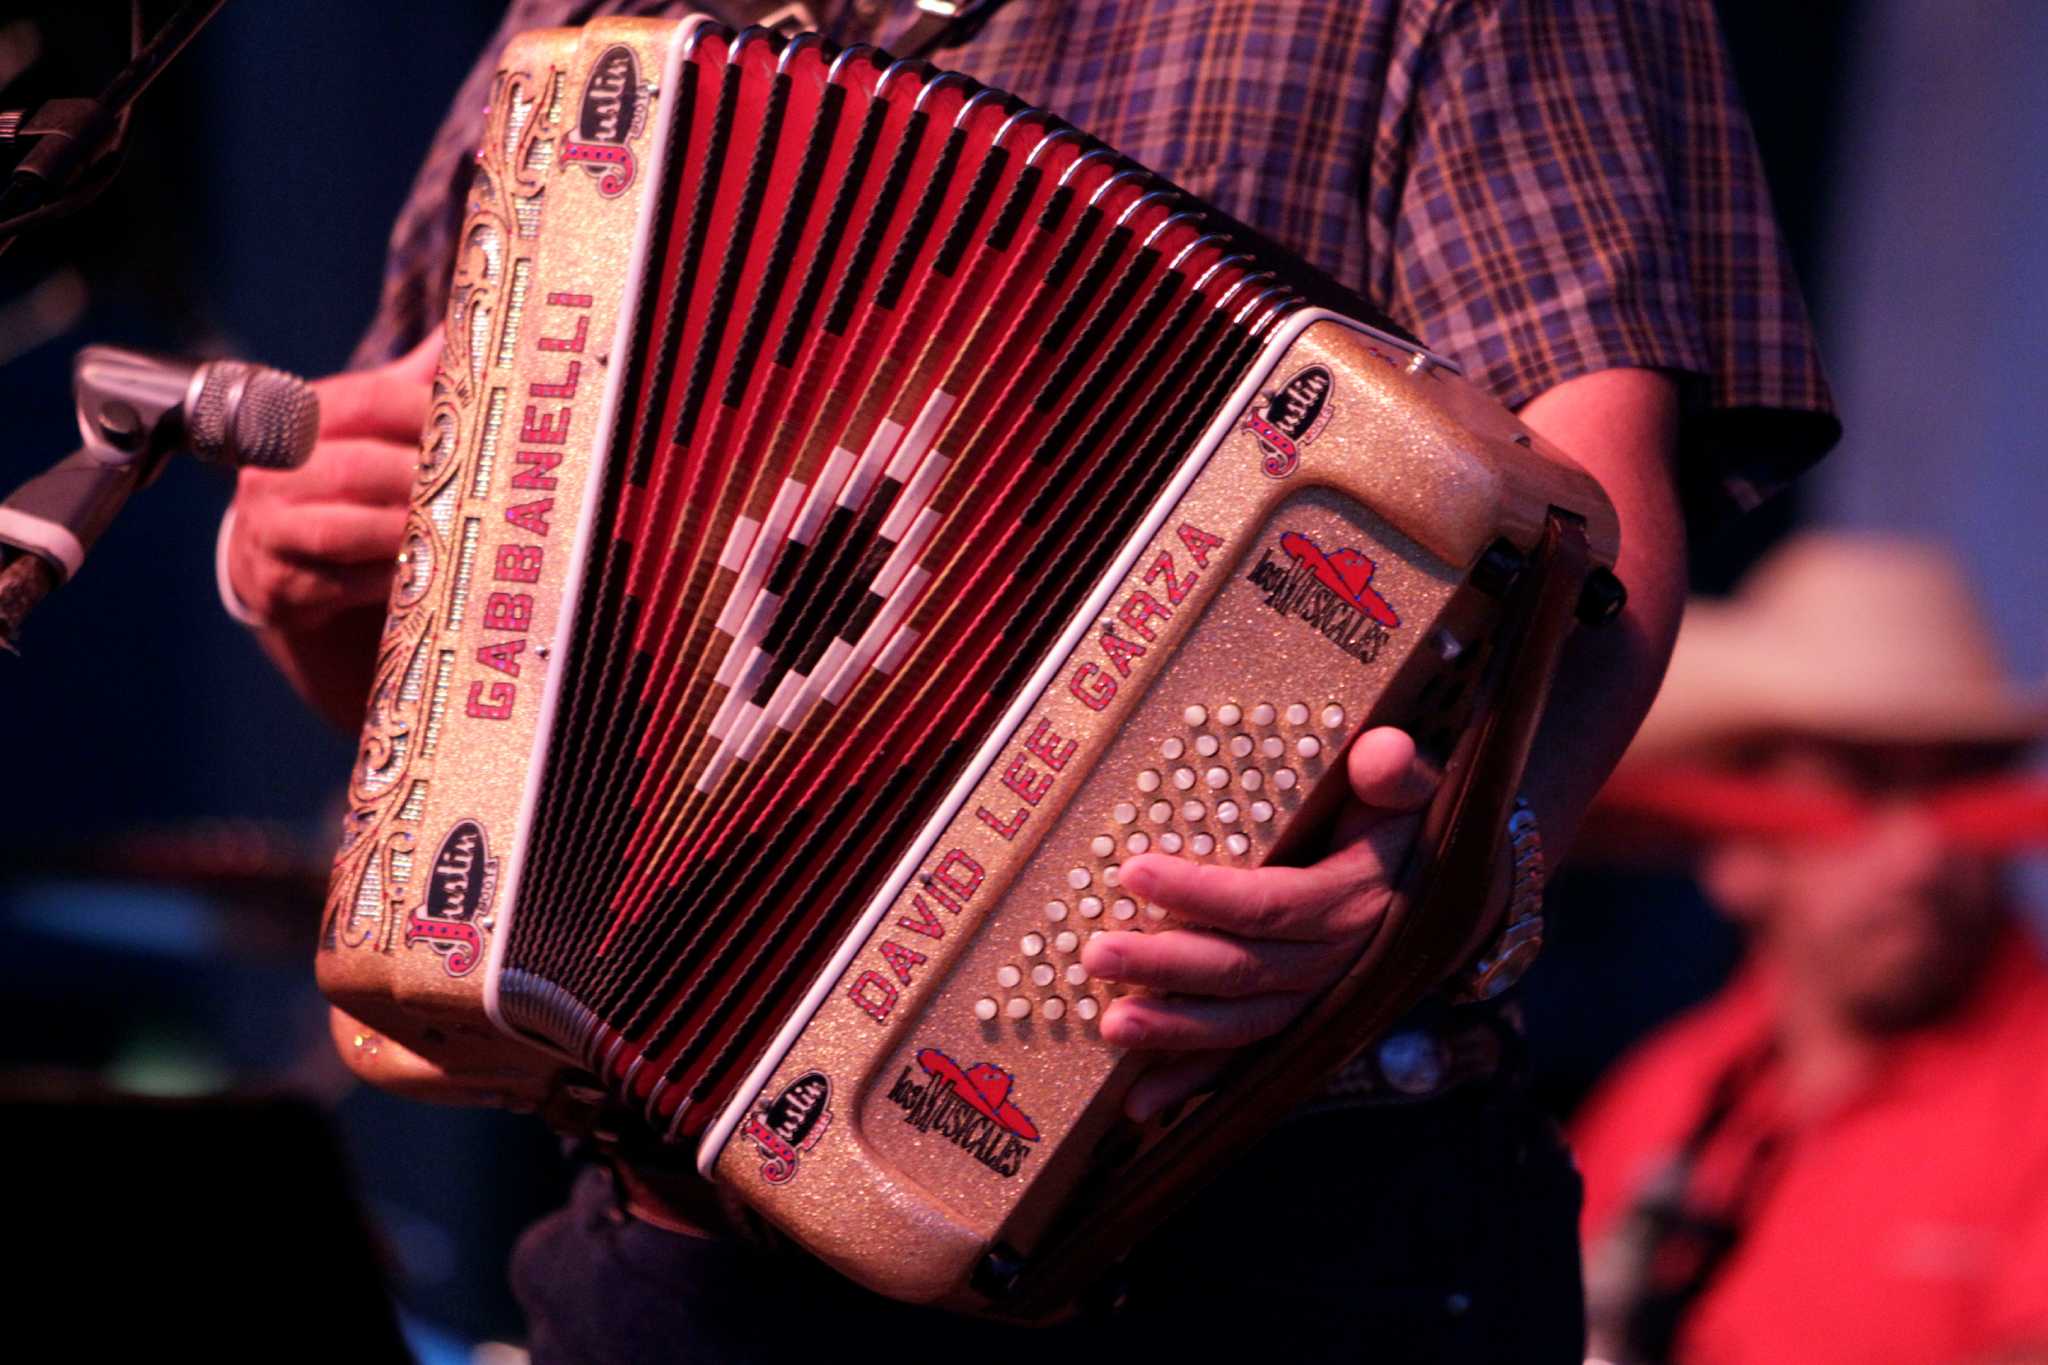 Accordion music to fill East End